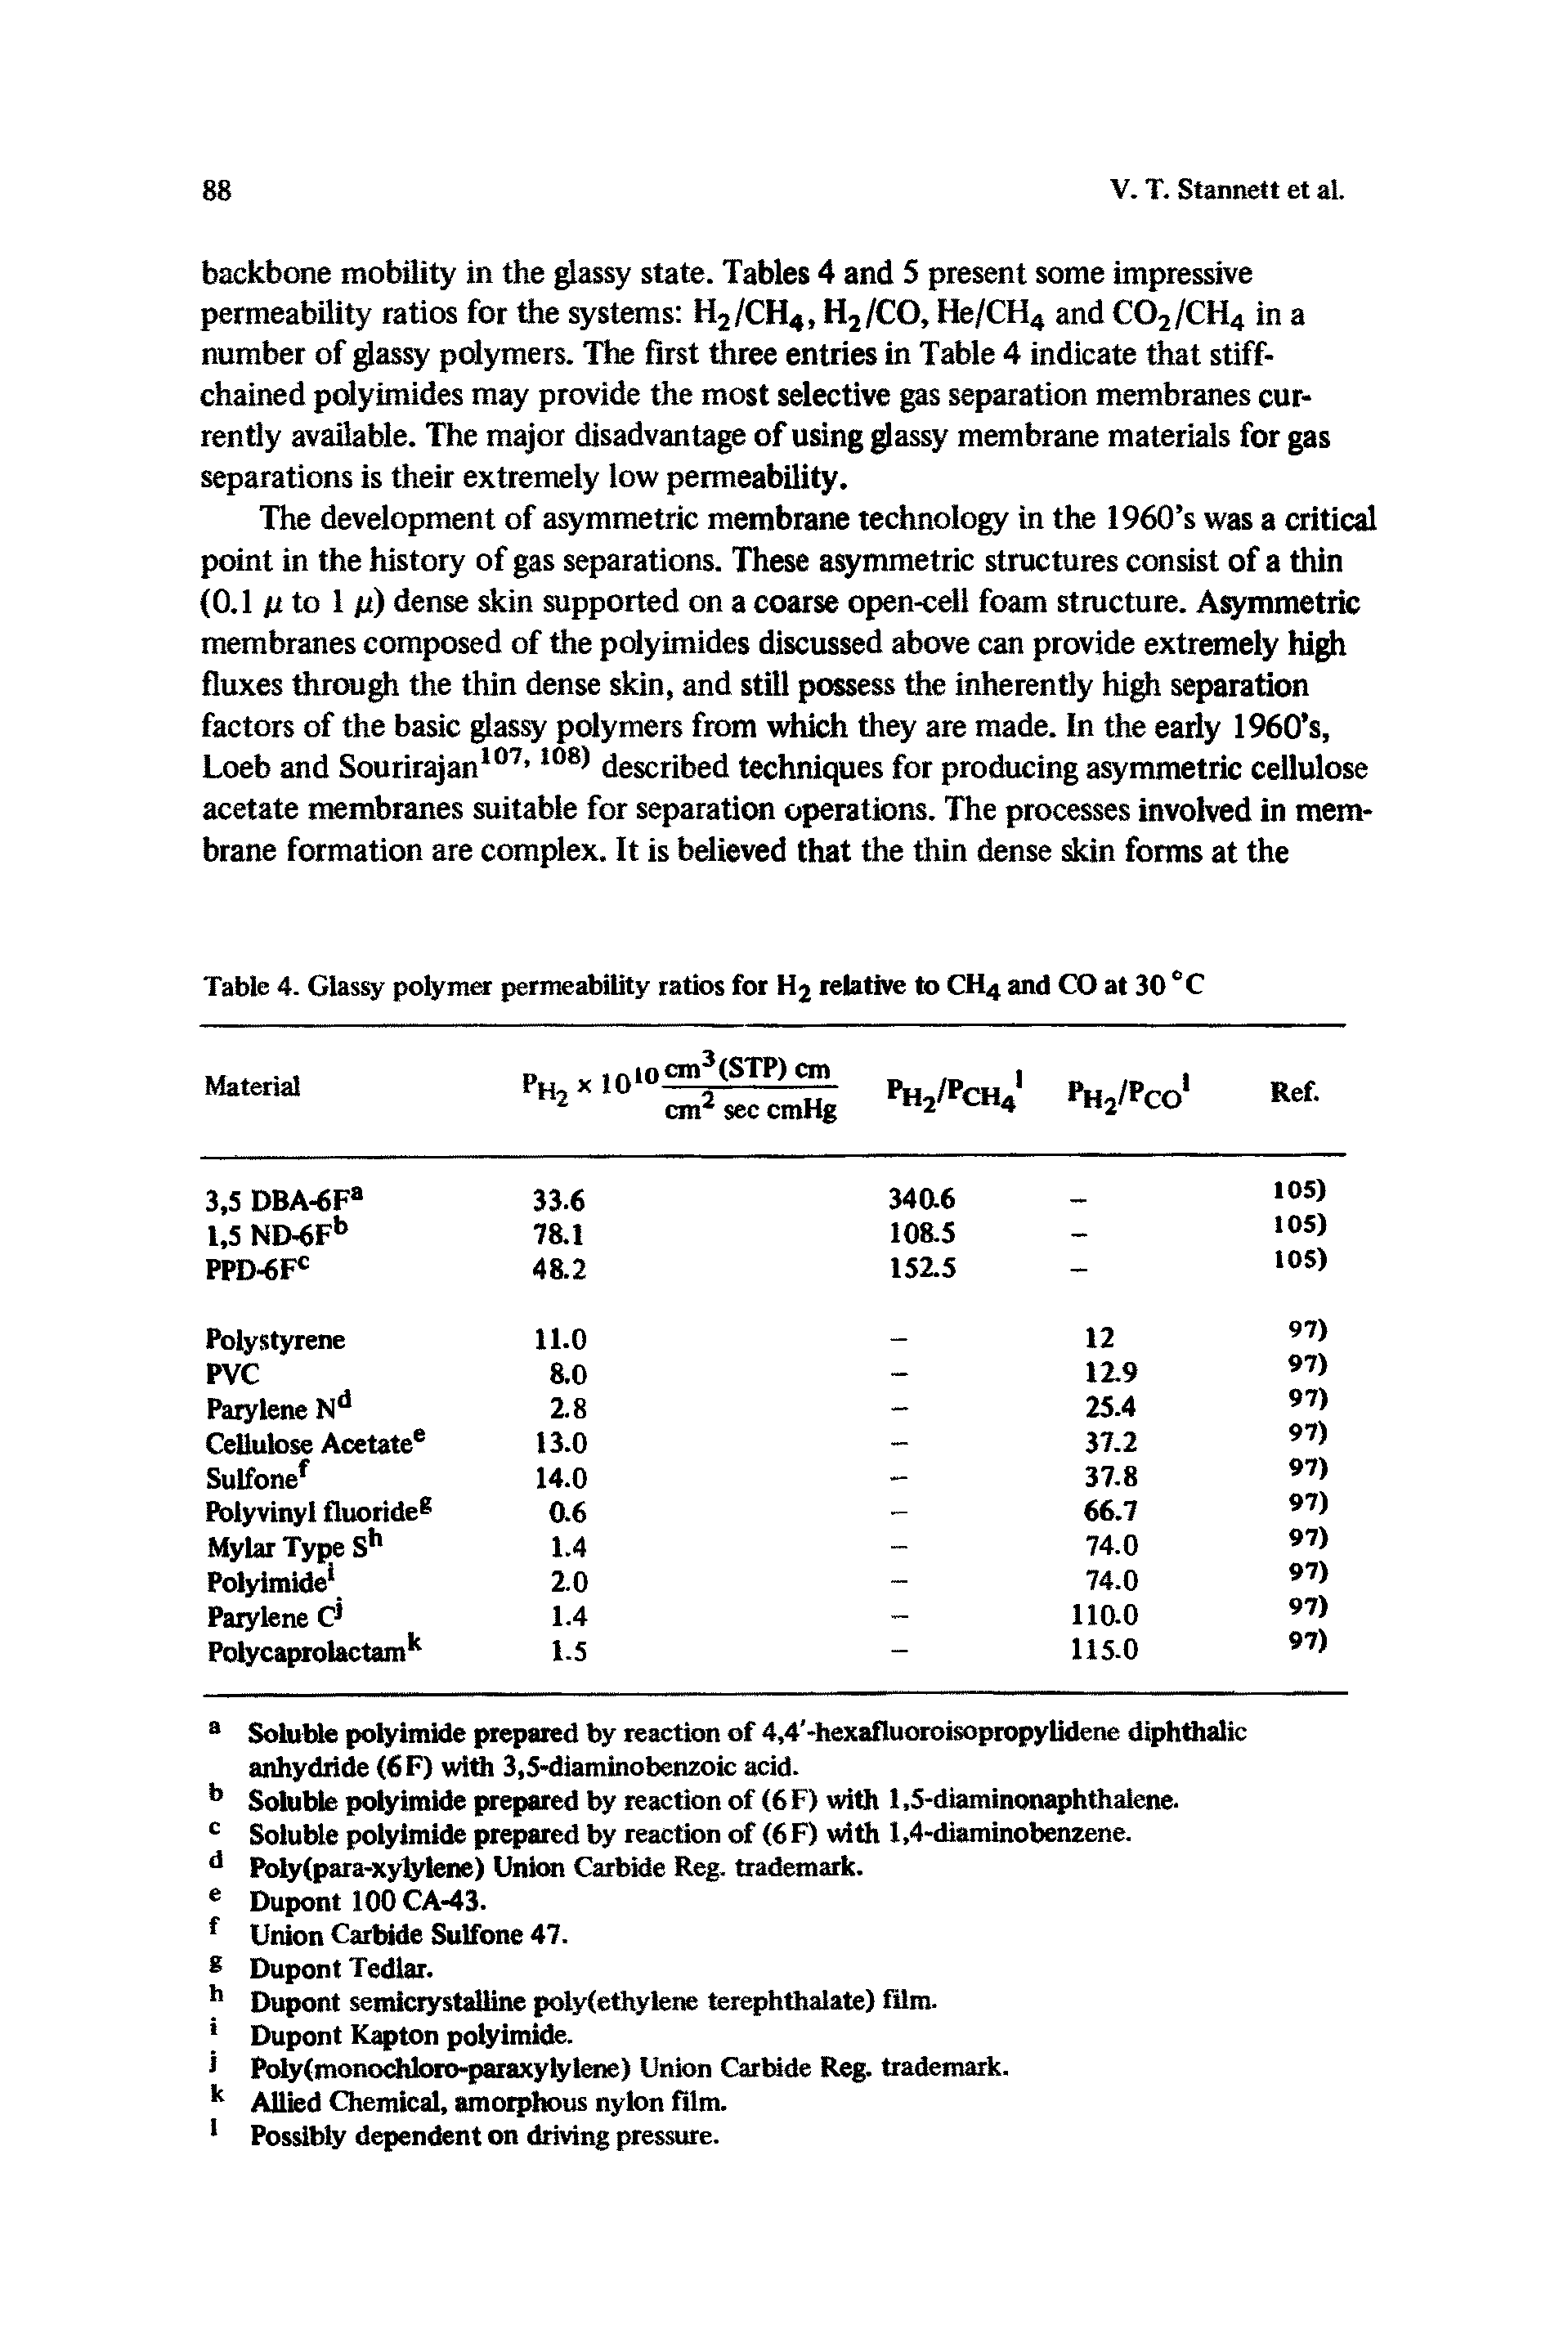 Table 4. Glassy polymer permeability ratios for H2 relative to CH4 and CO at 30 °C...